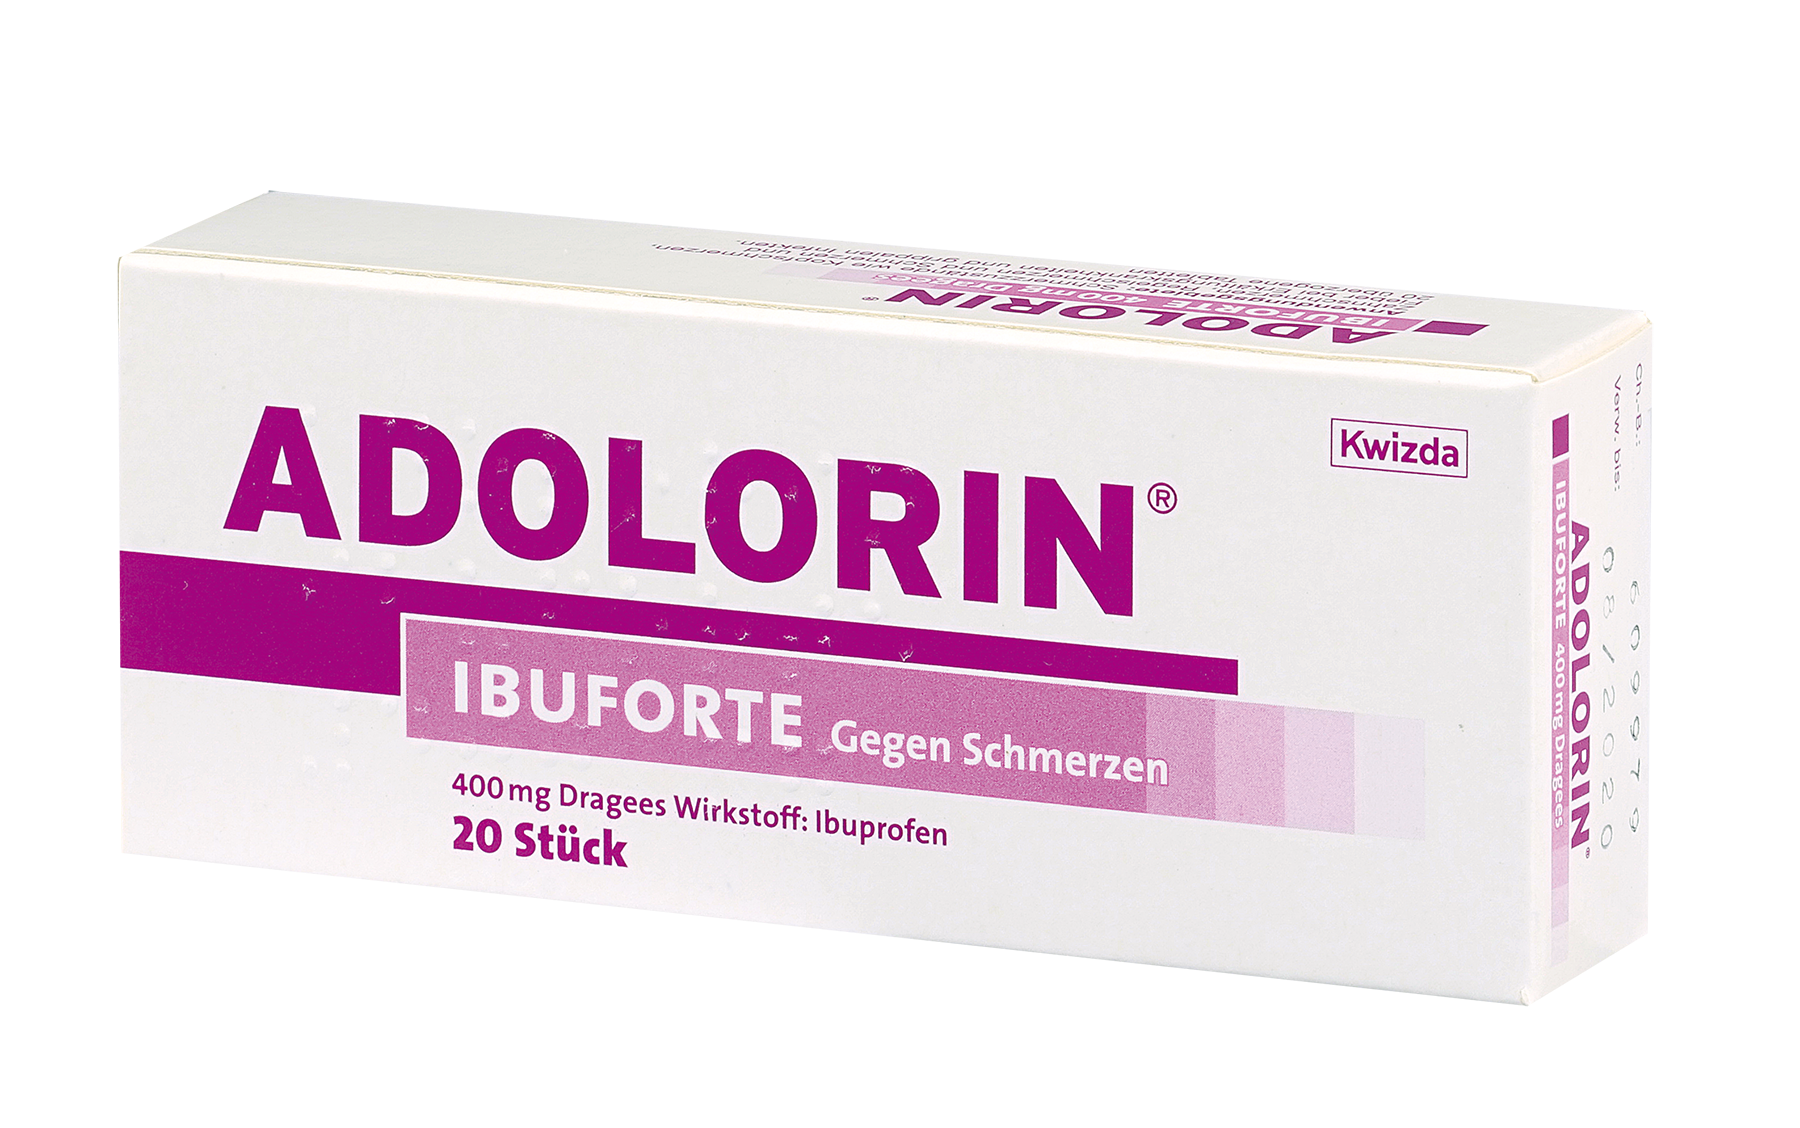 Adolorin Ibuforte 400 mg - Dragees